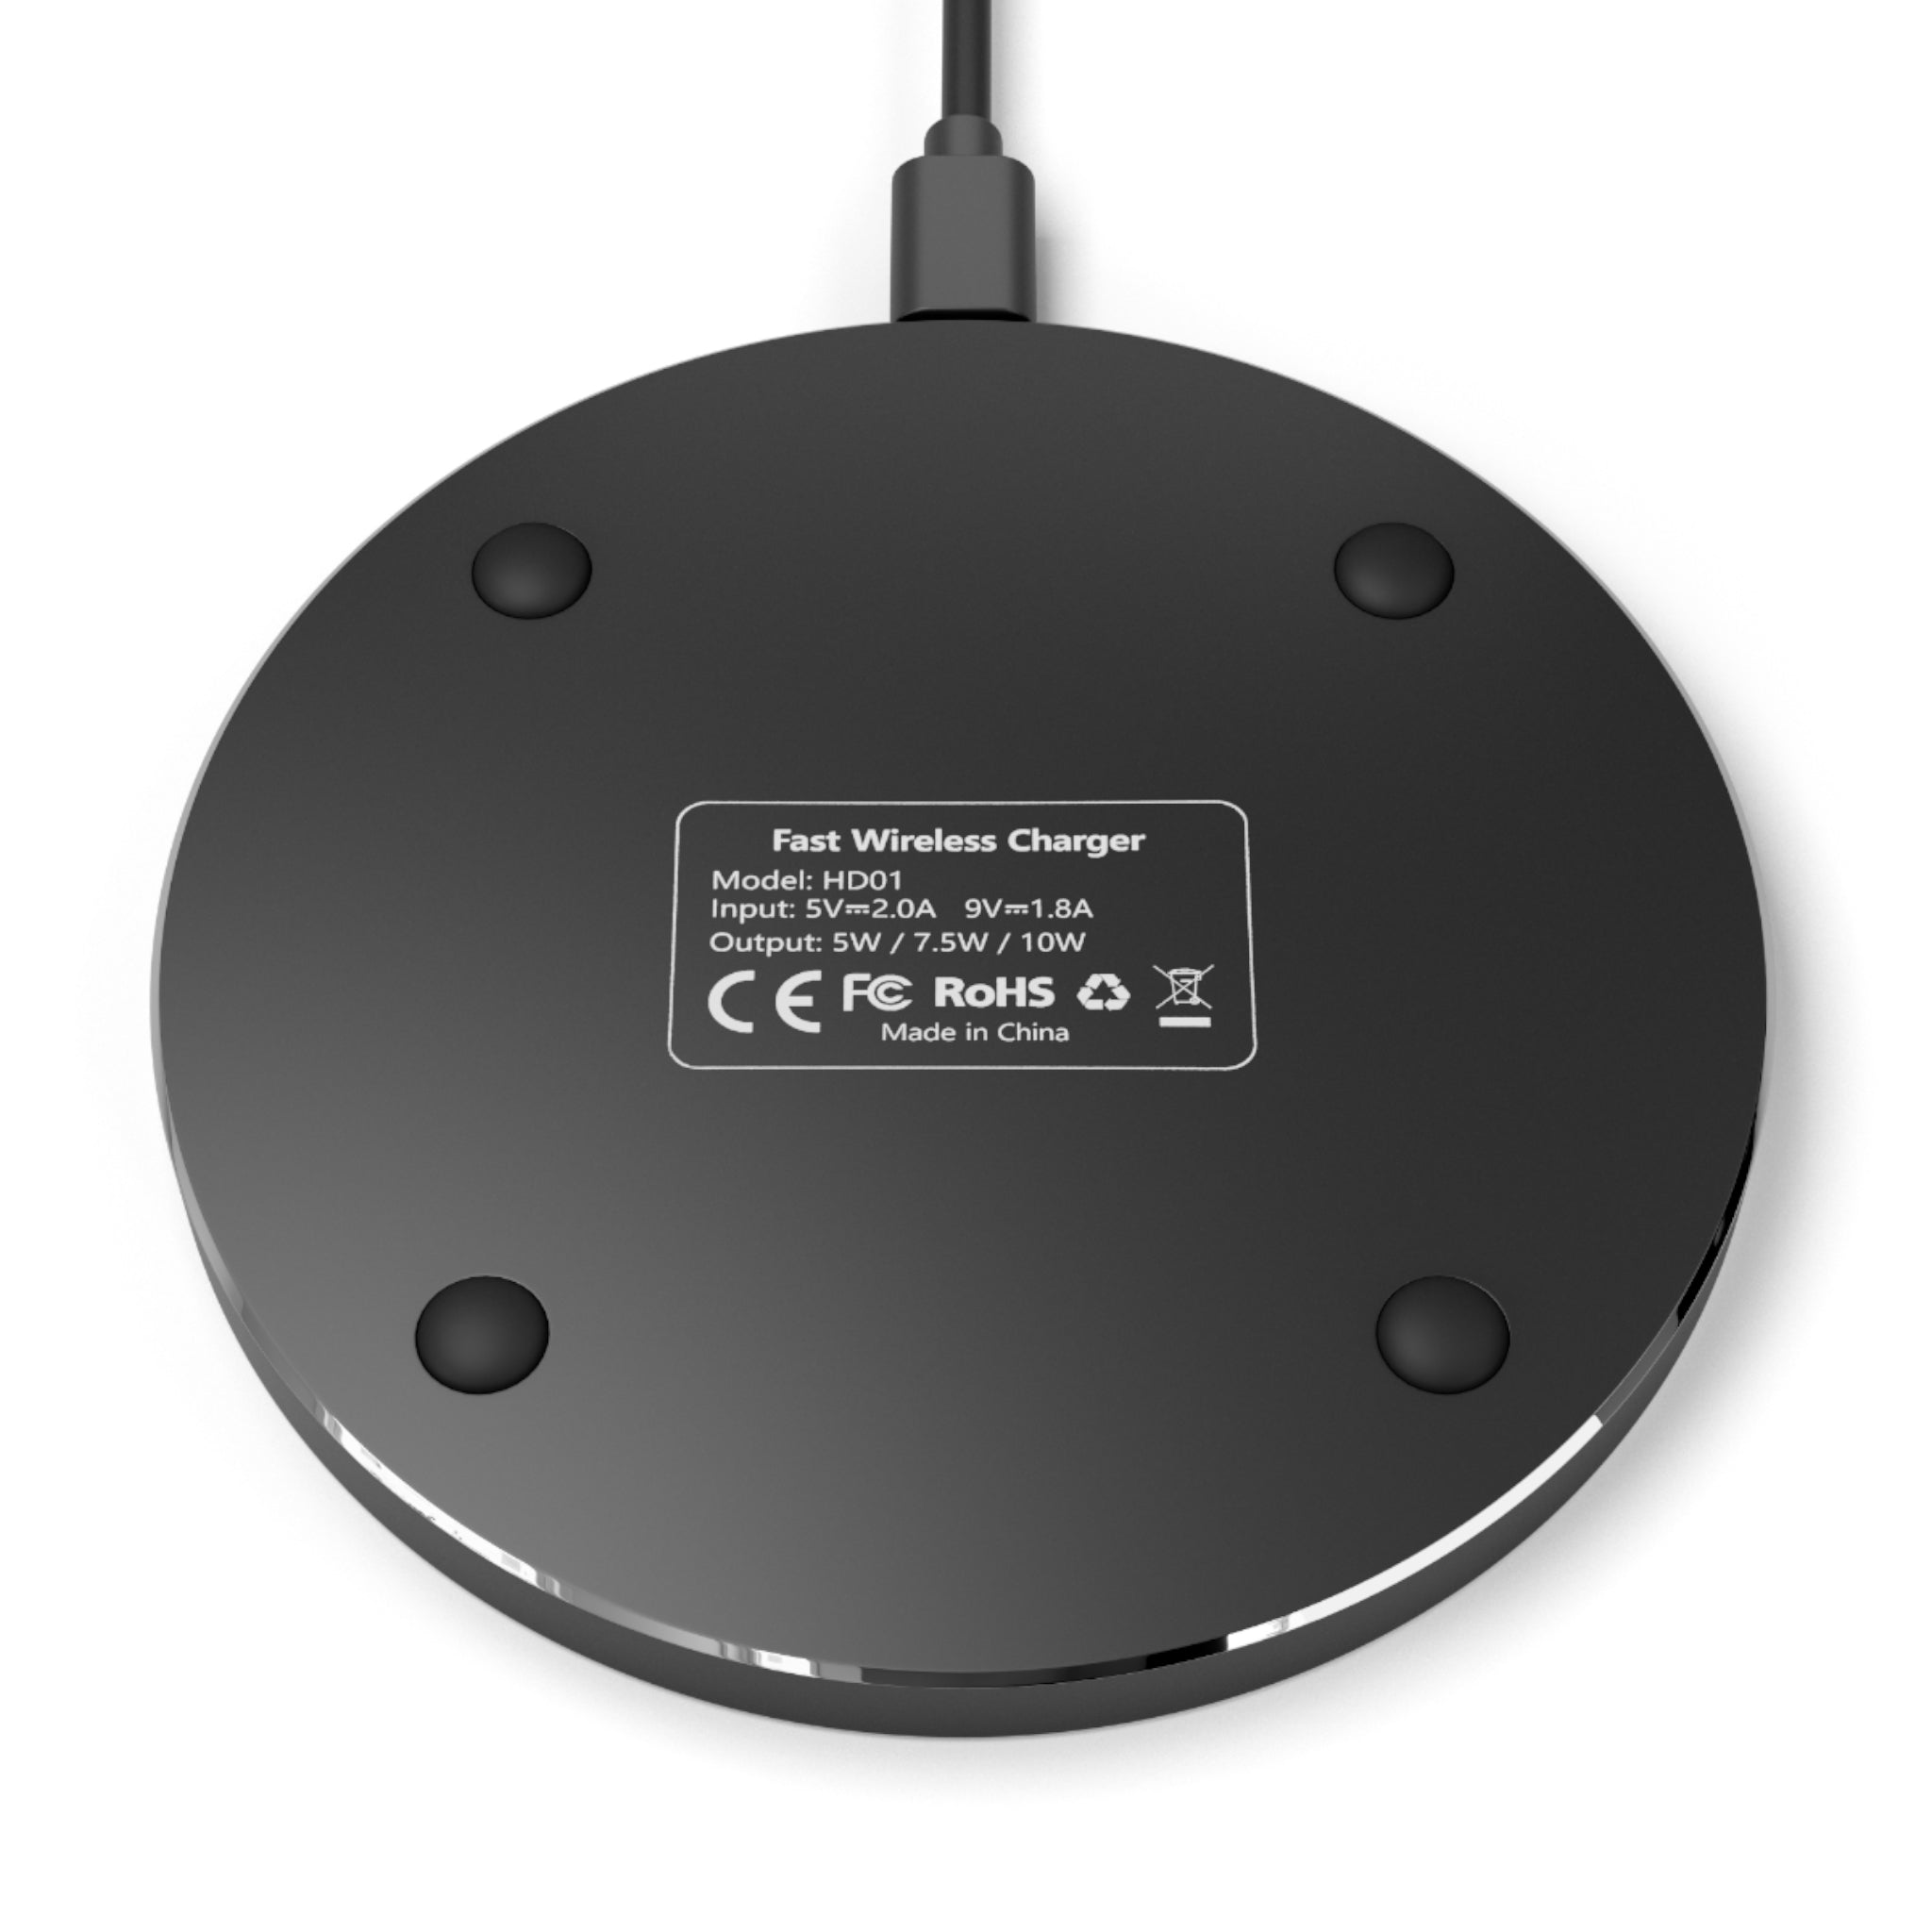 SORTED Wireless Charger